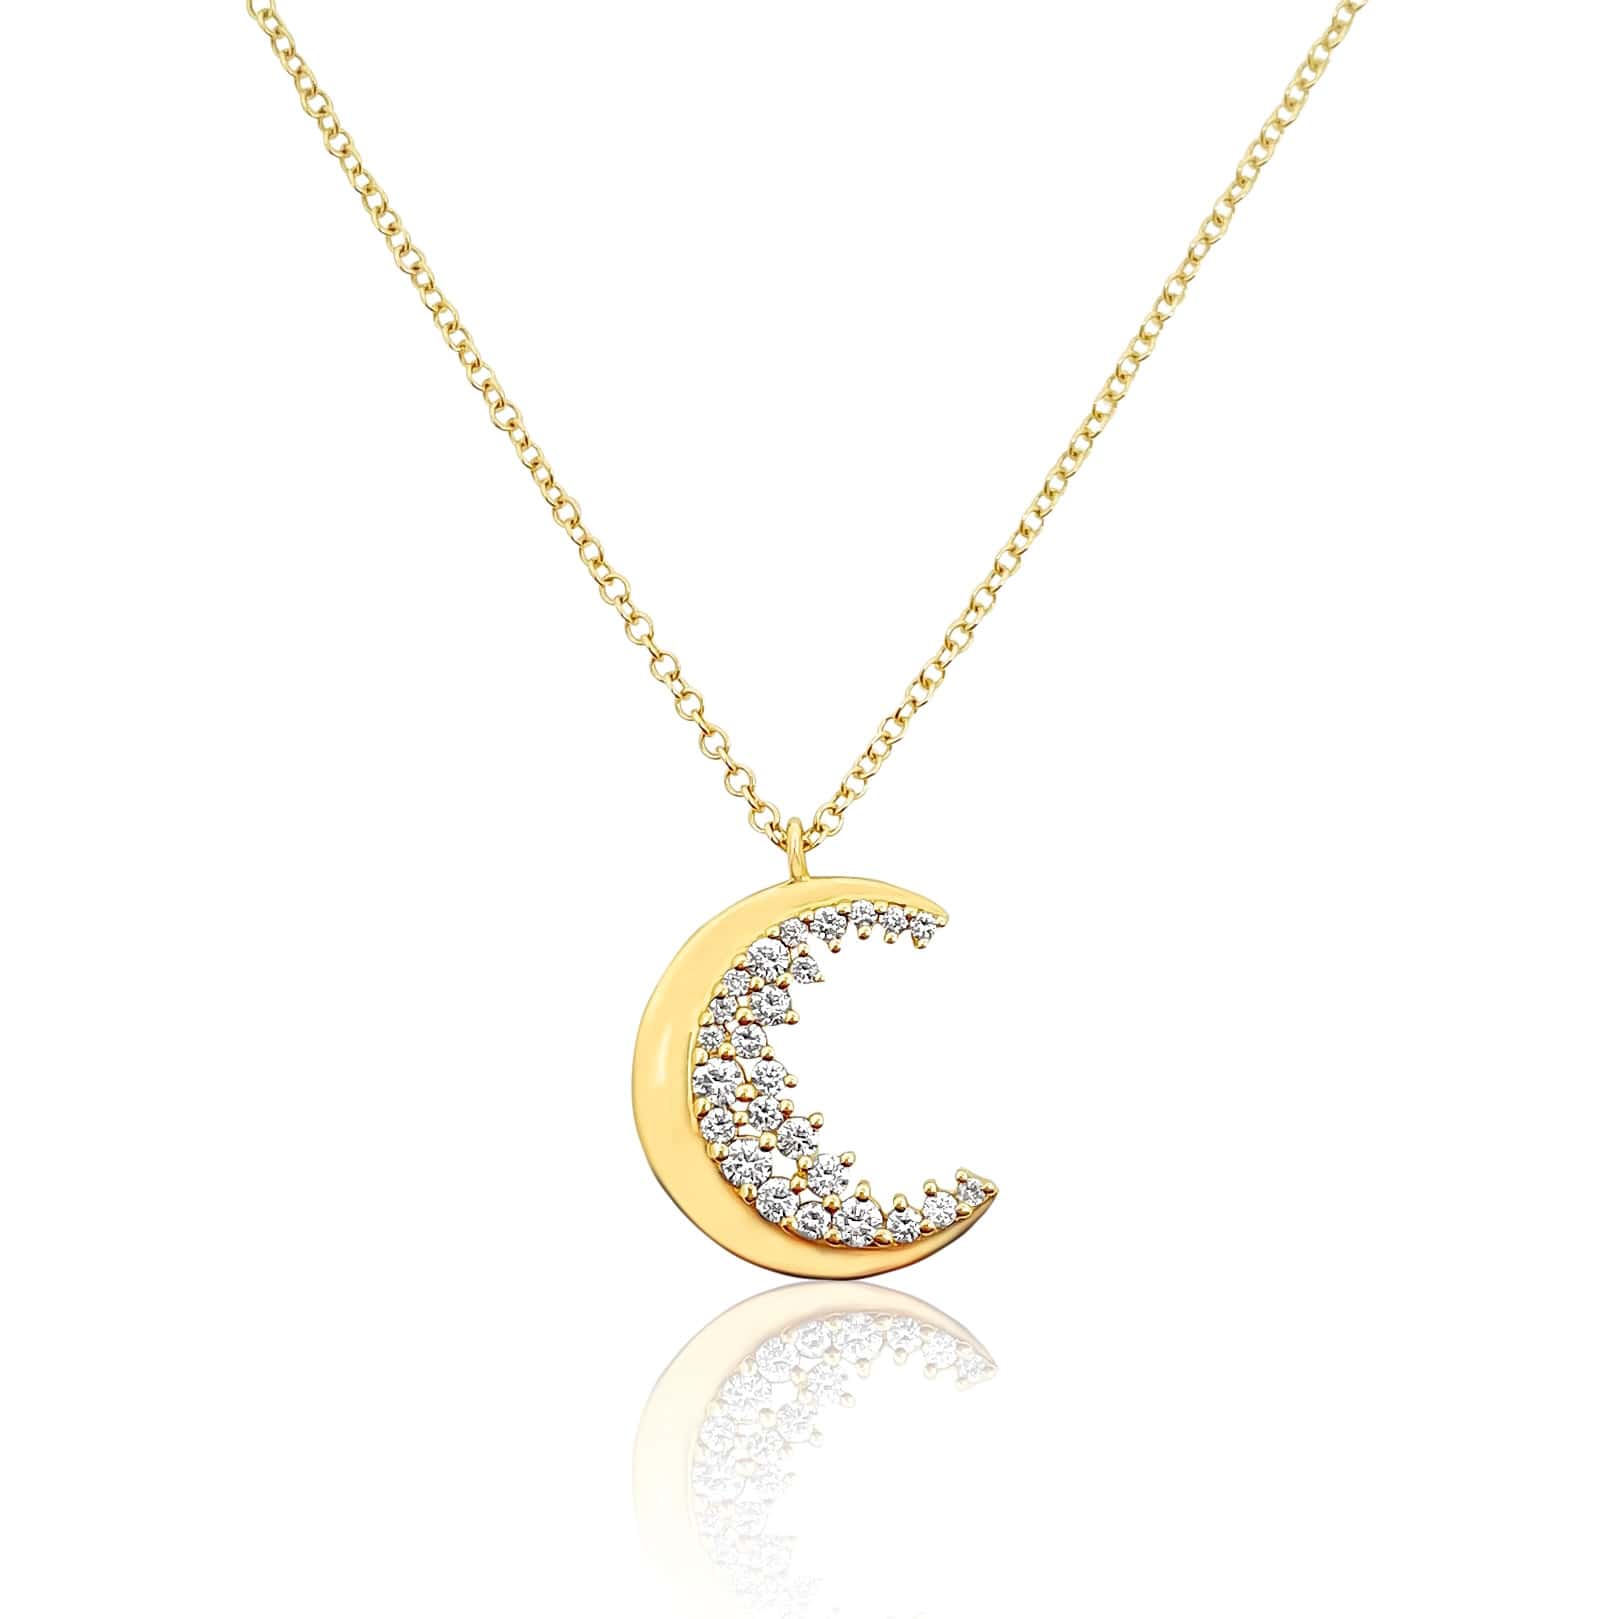 Buy Diamond Moon Necklace Online In India - Etsy India